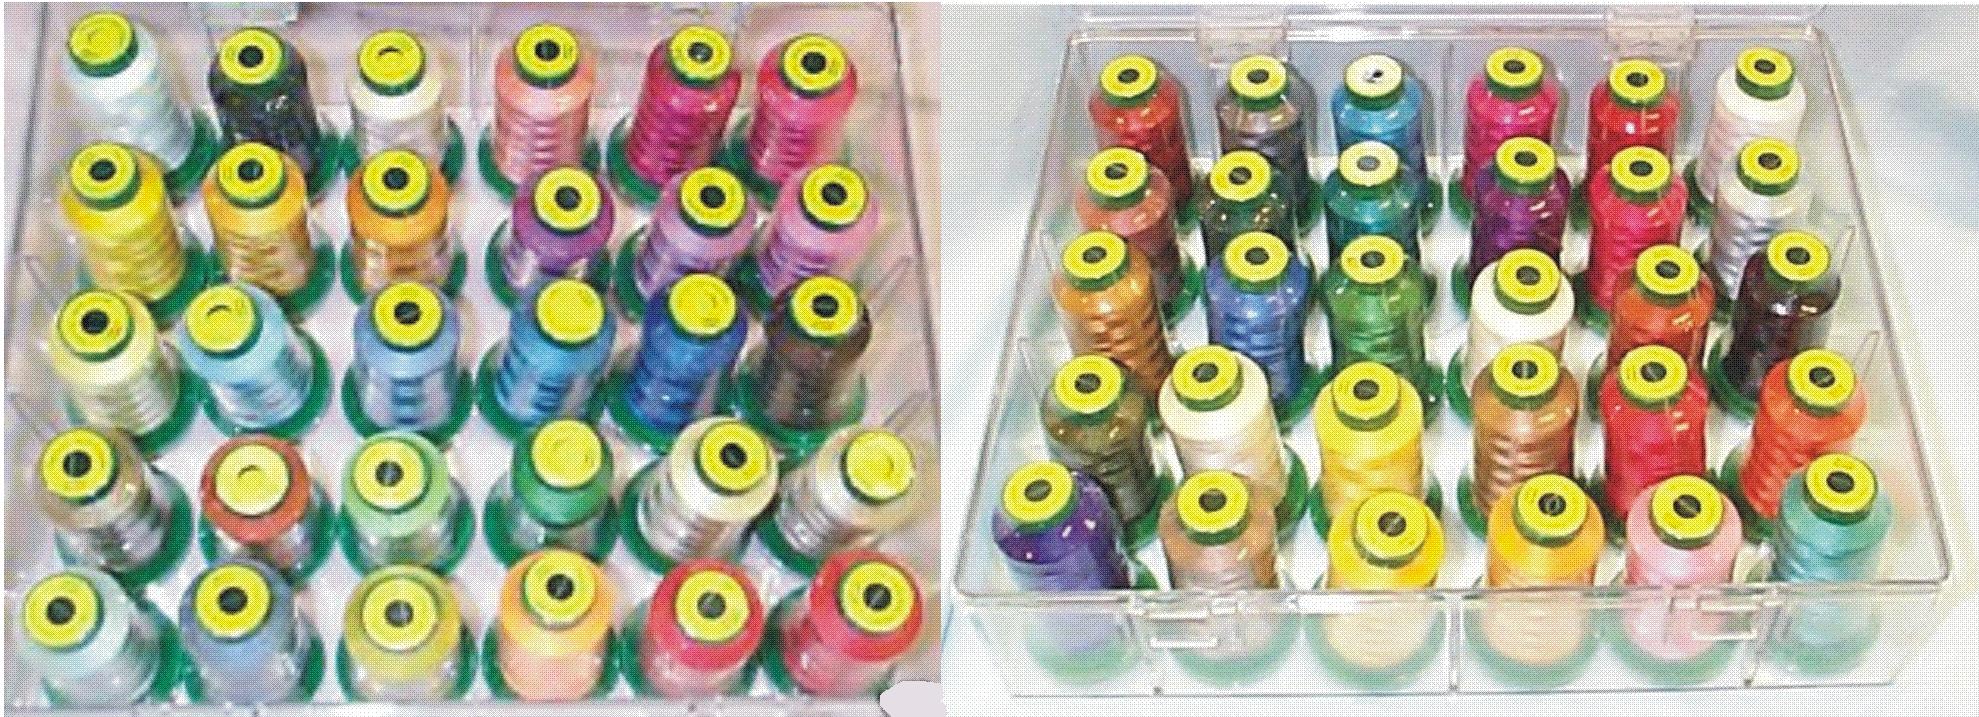 Exquisite 60 Disney Color Embroidery Thread Set (Box not included) –